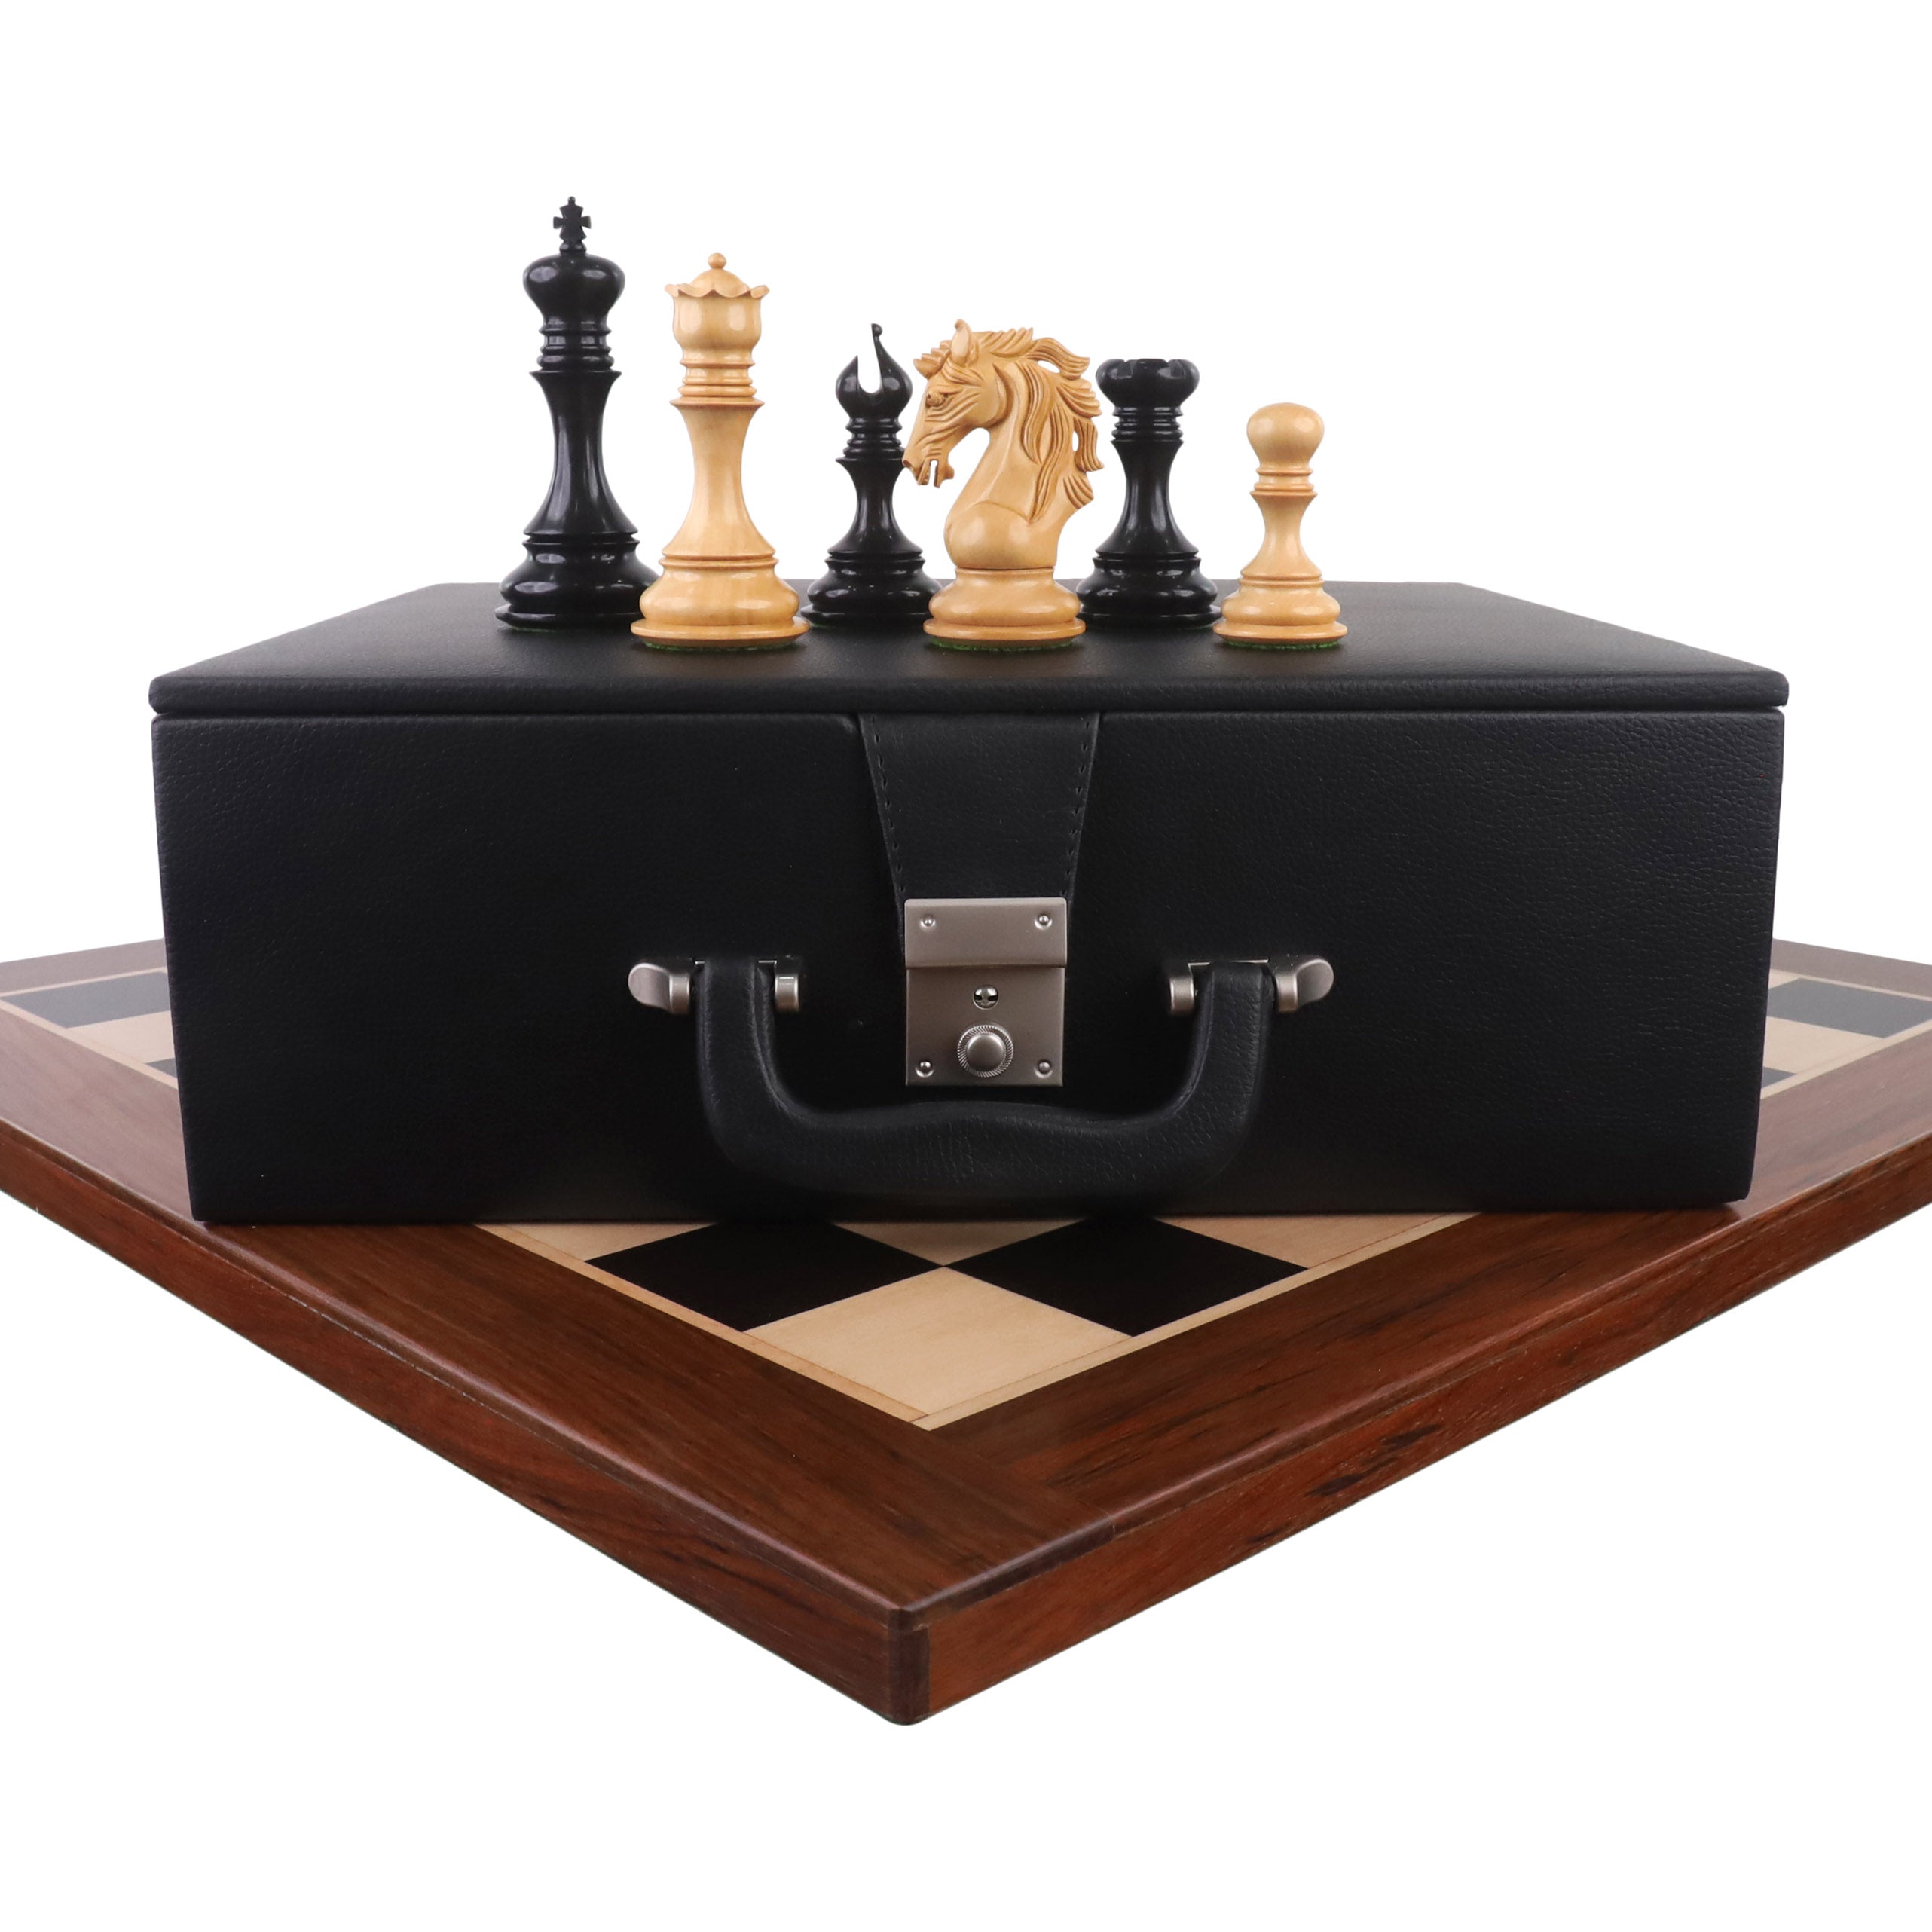 Combo of Goliath Series Luxury Staunton Chess Set - Pieces in Ebony Wood with Board and Box